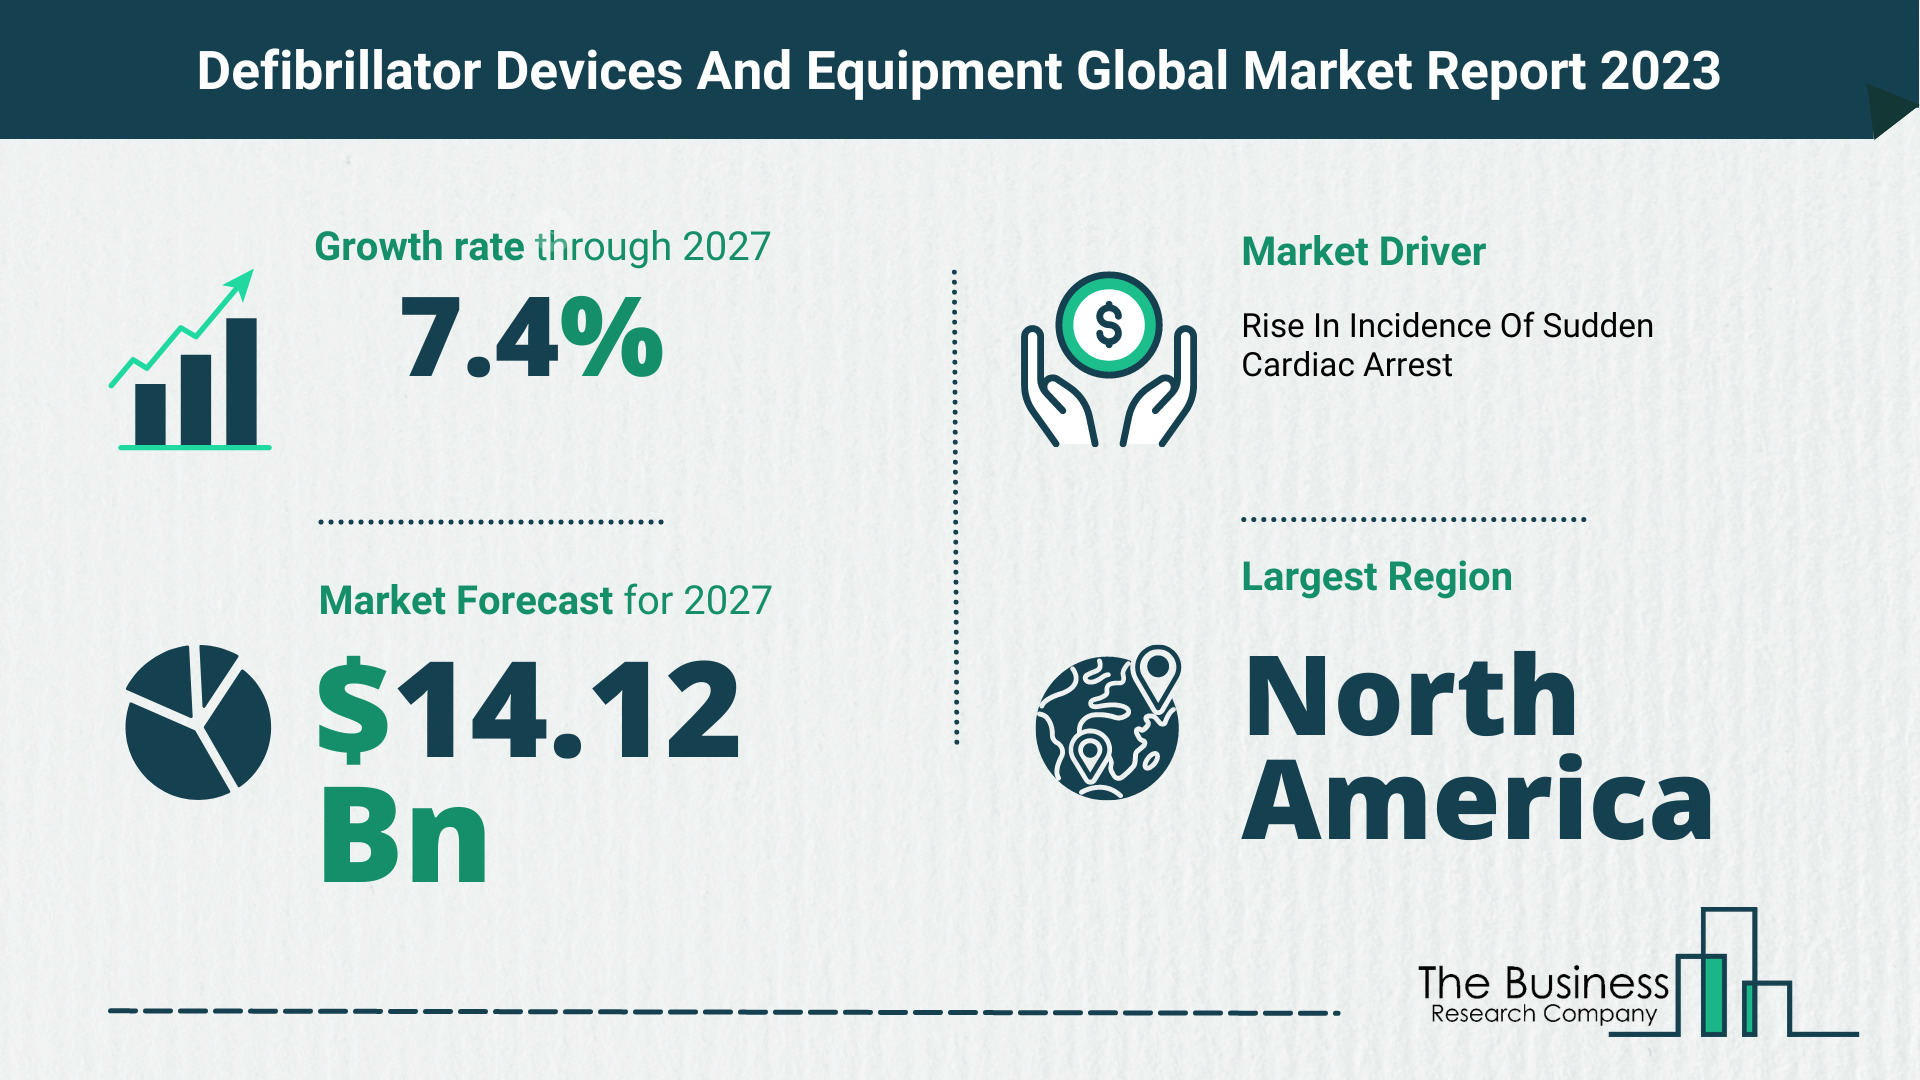 Global Defibrillator Devices And Equipment Market Size